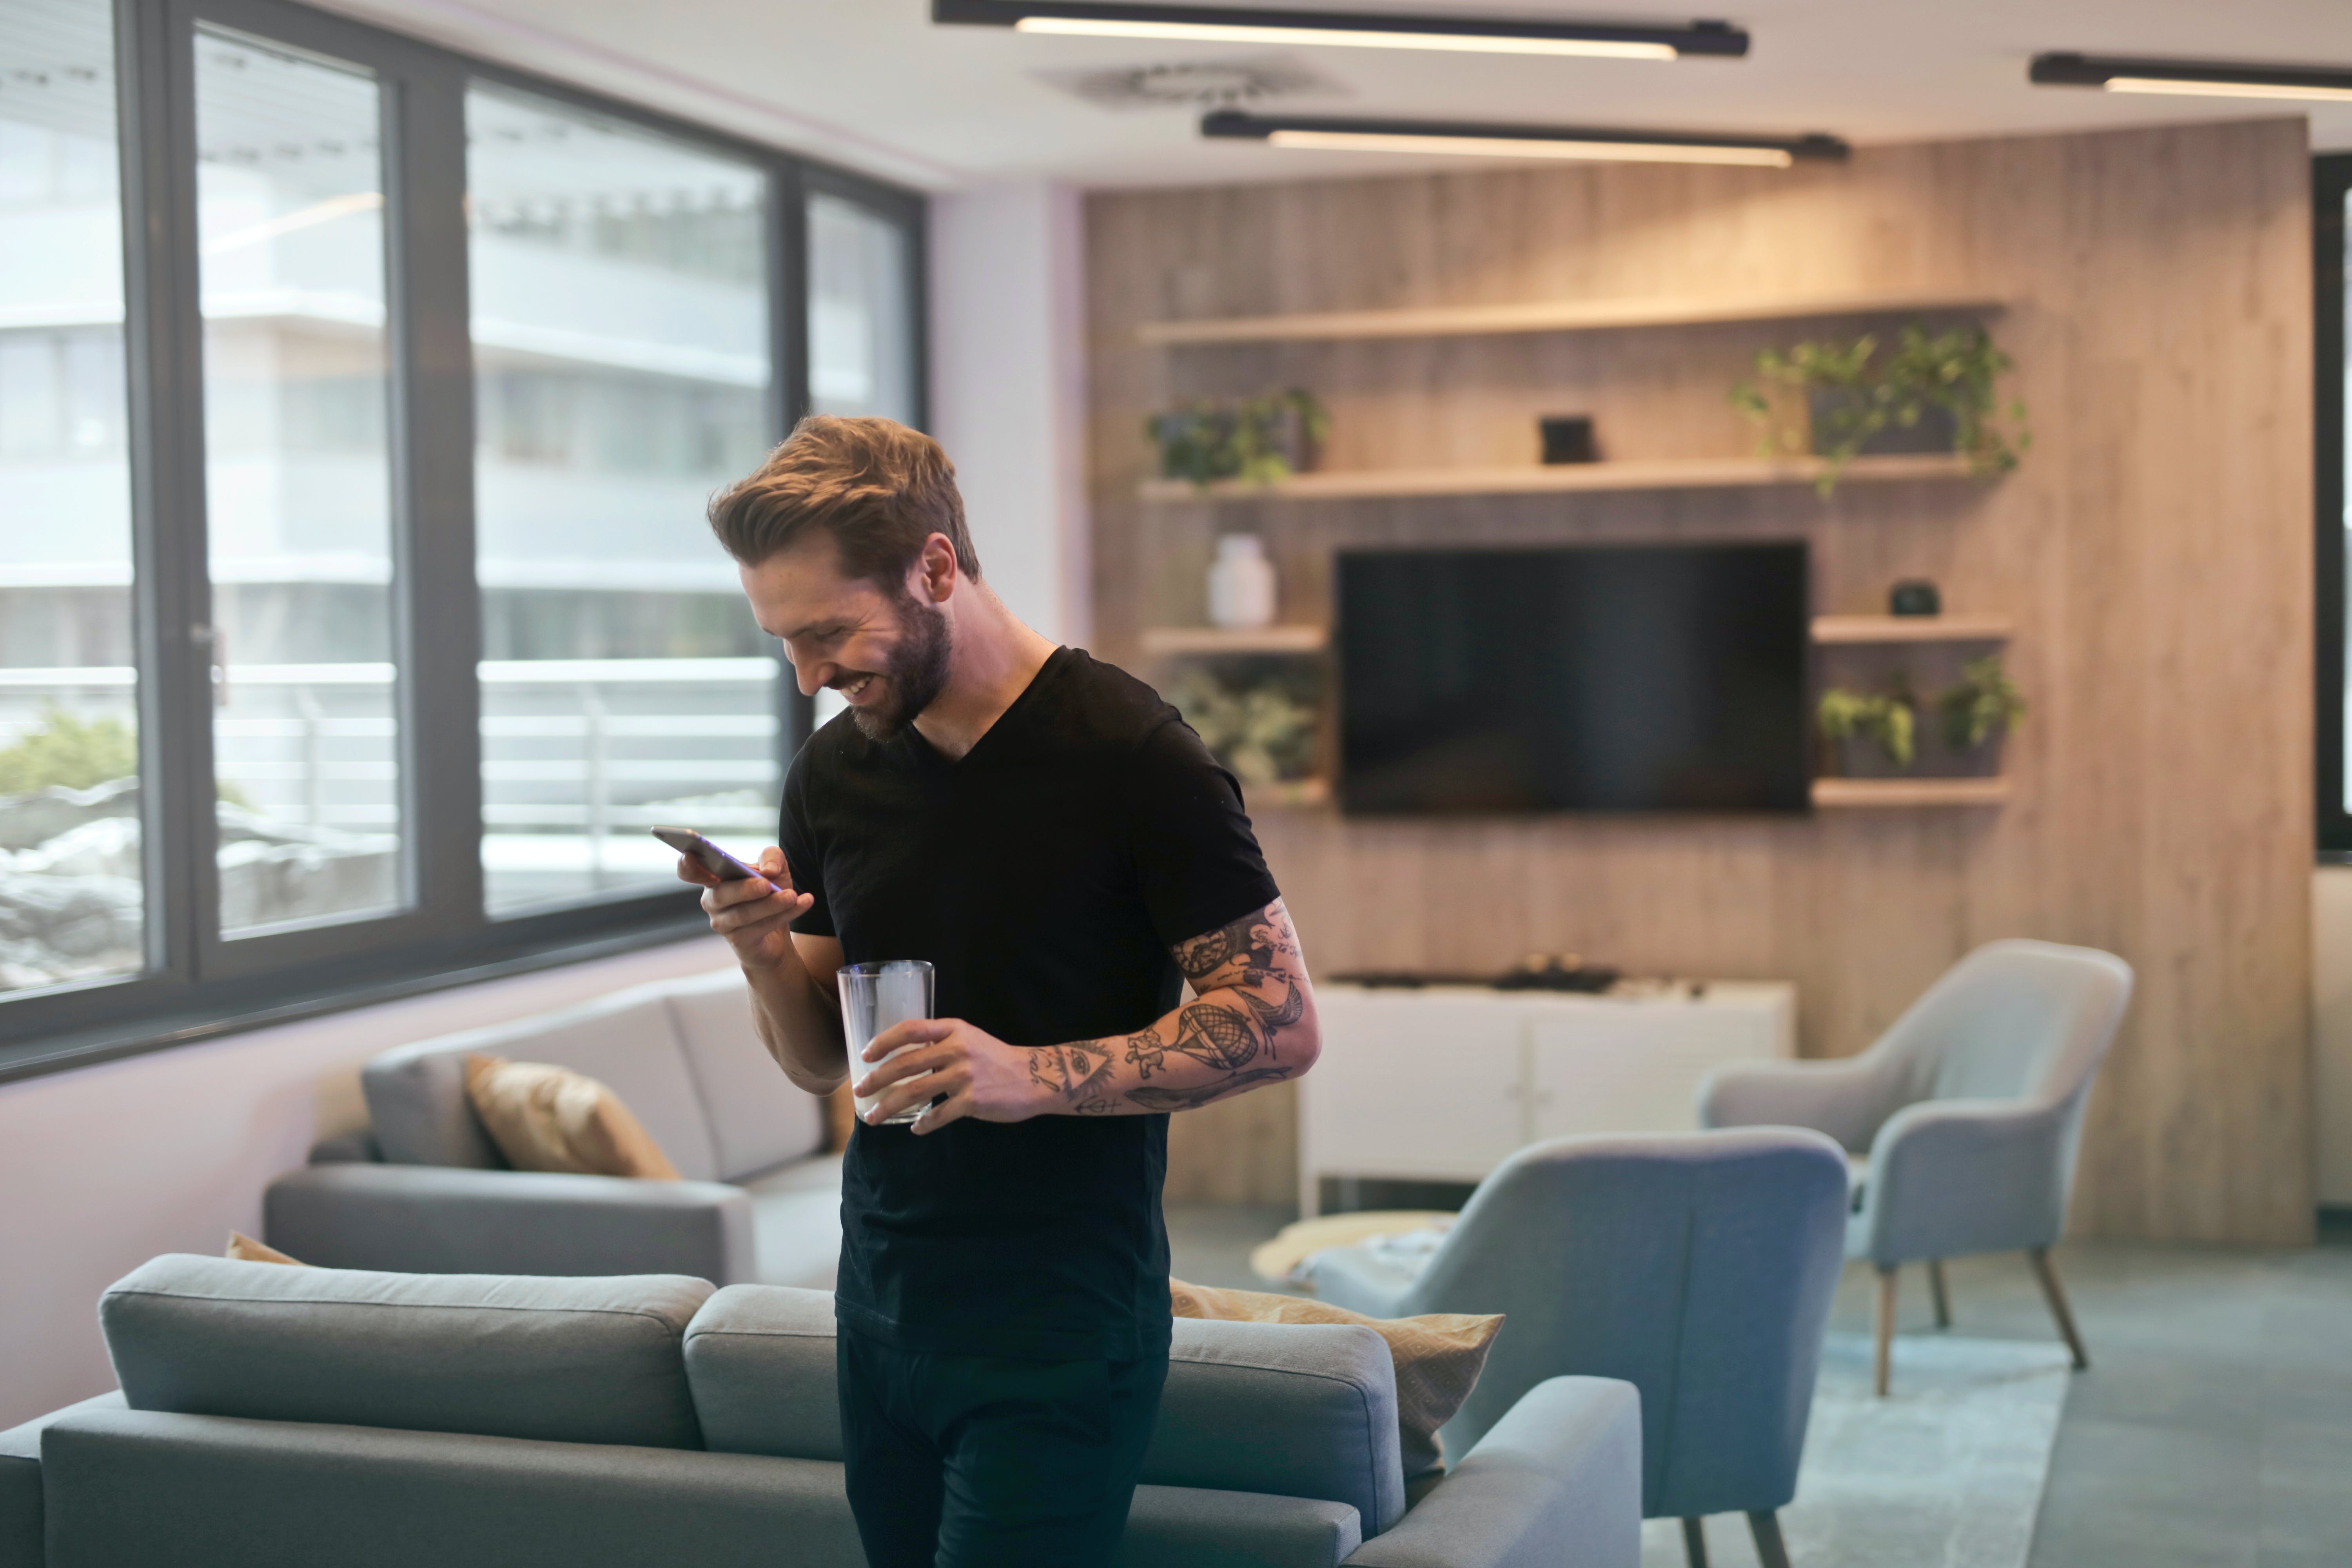 A man texts on his phone in an office